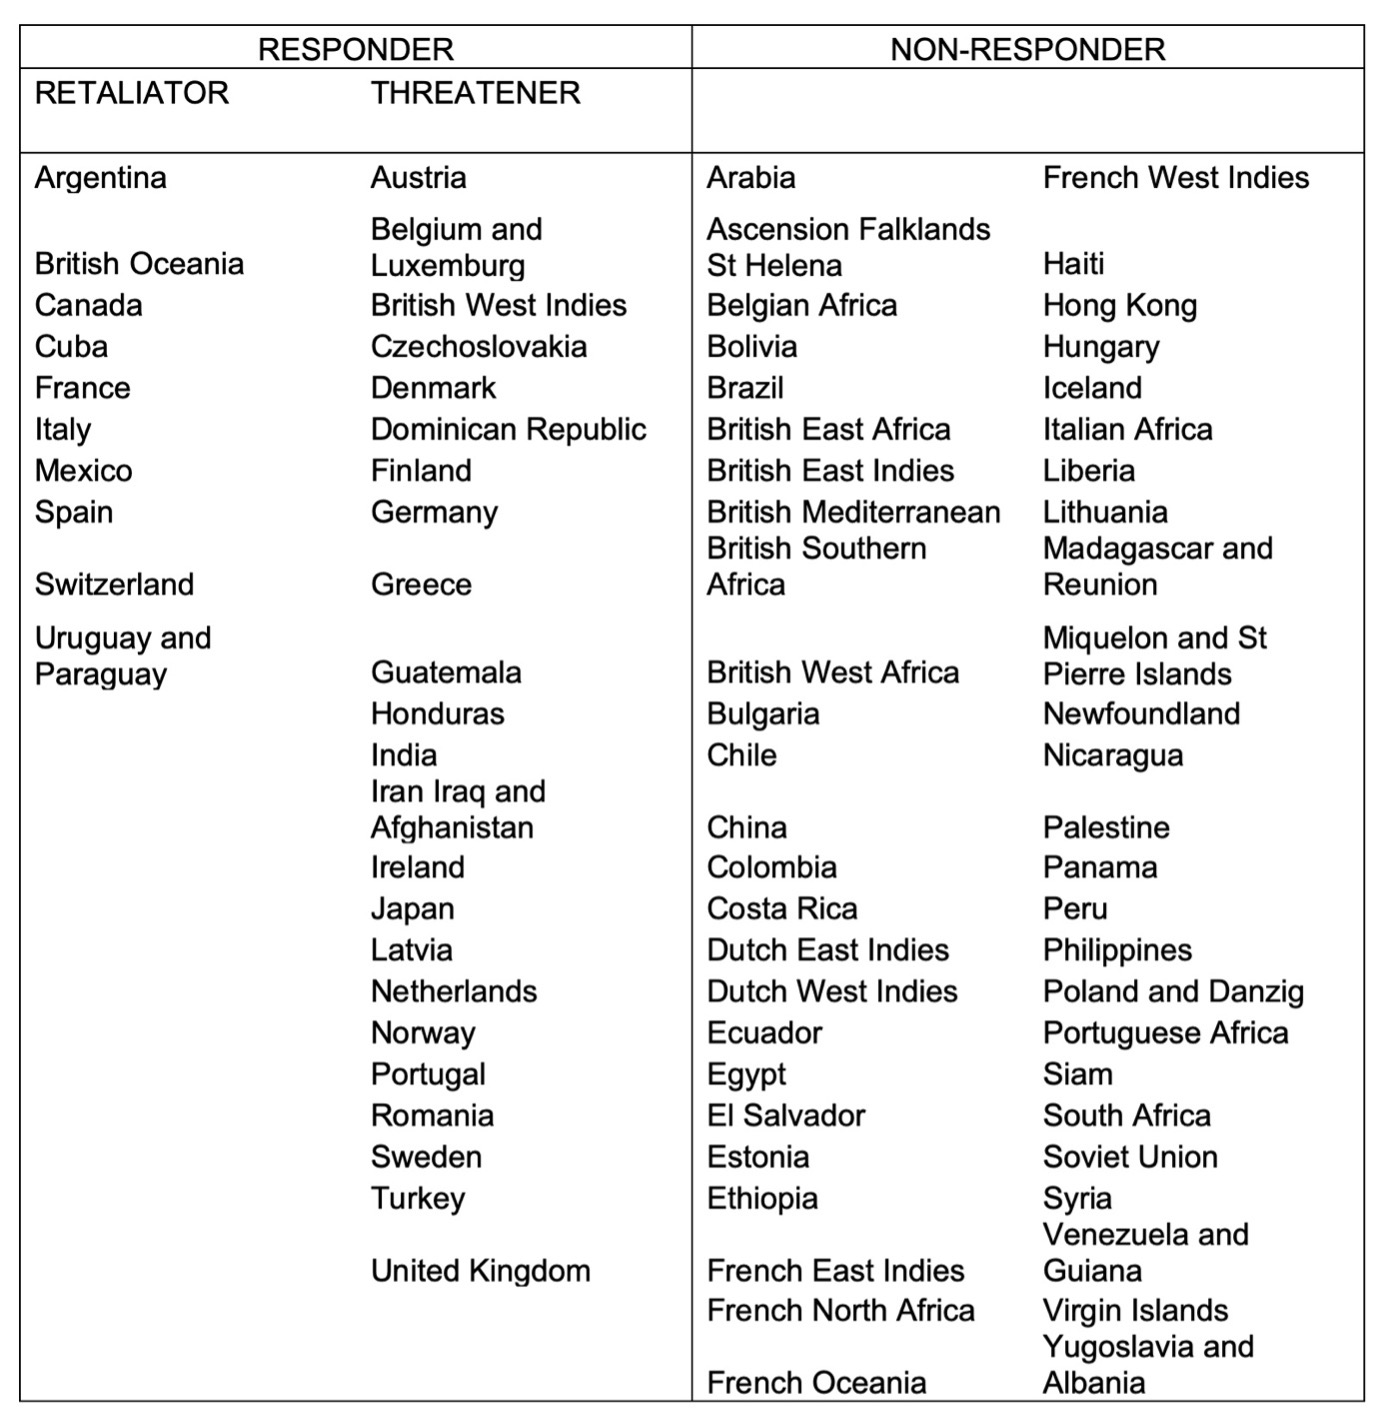 Annex: List of territories used in the analysis